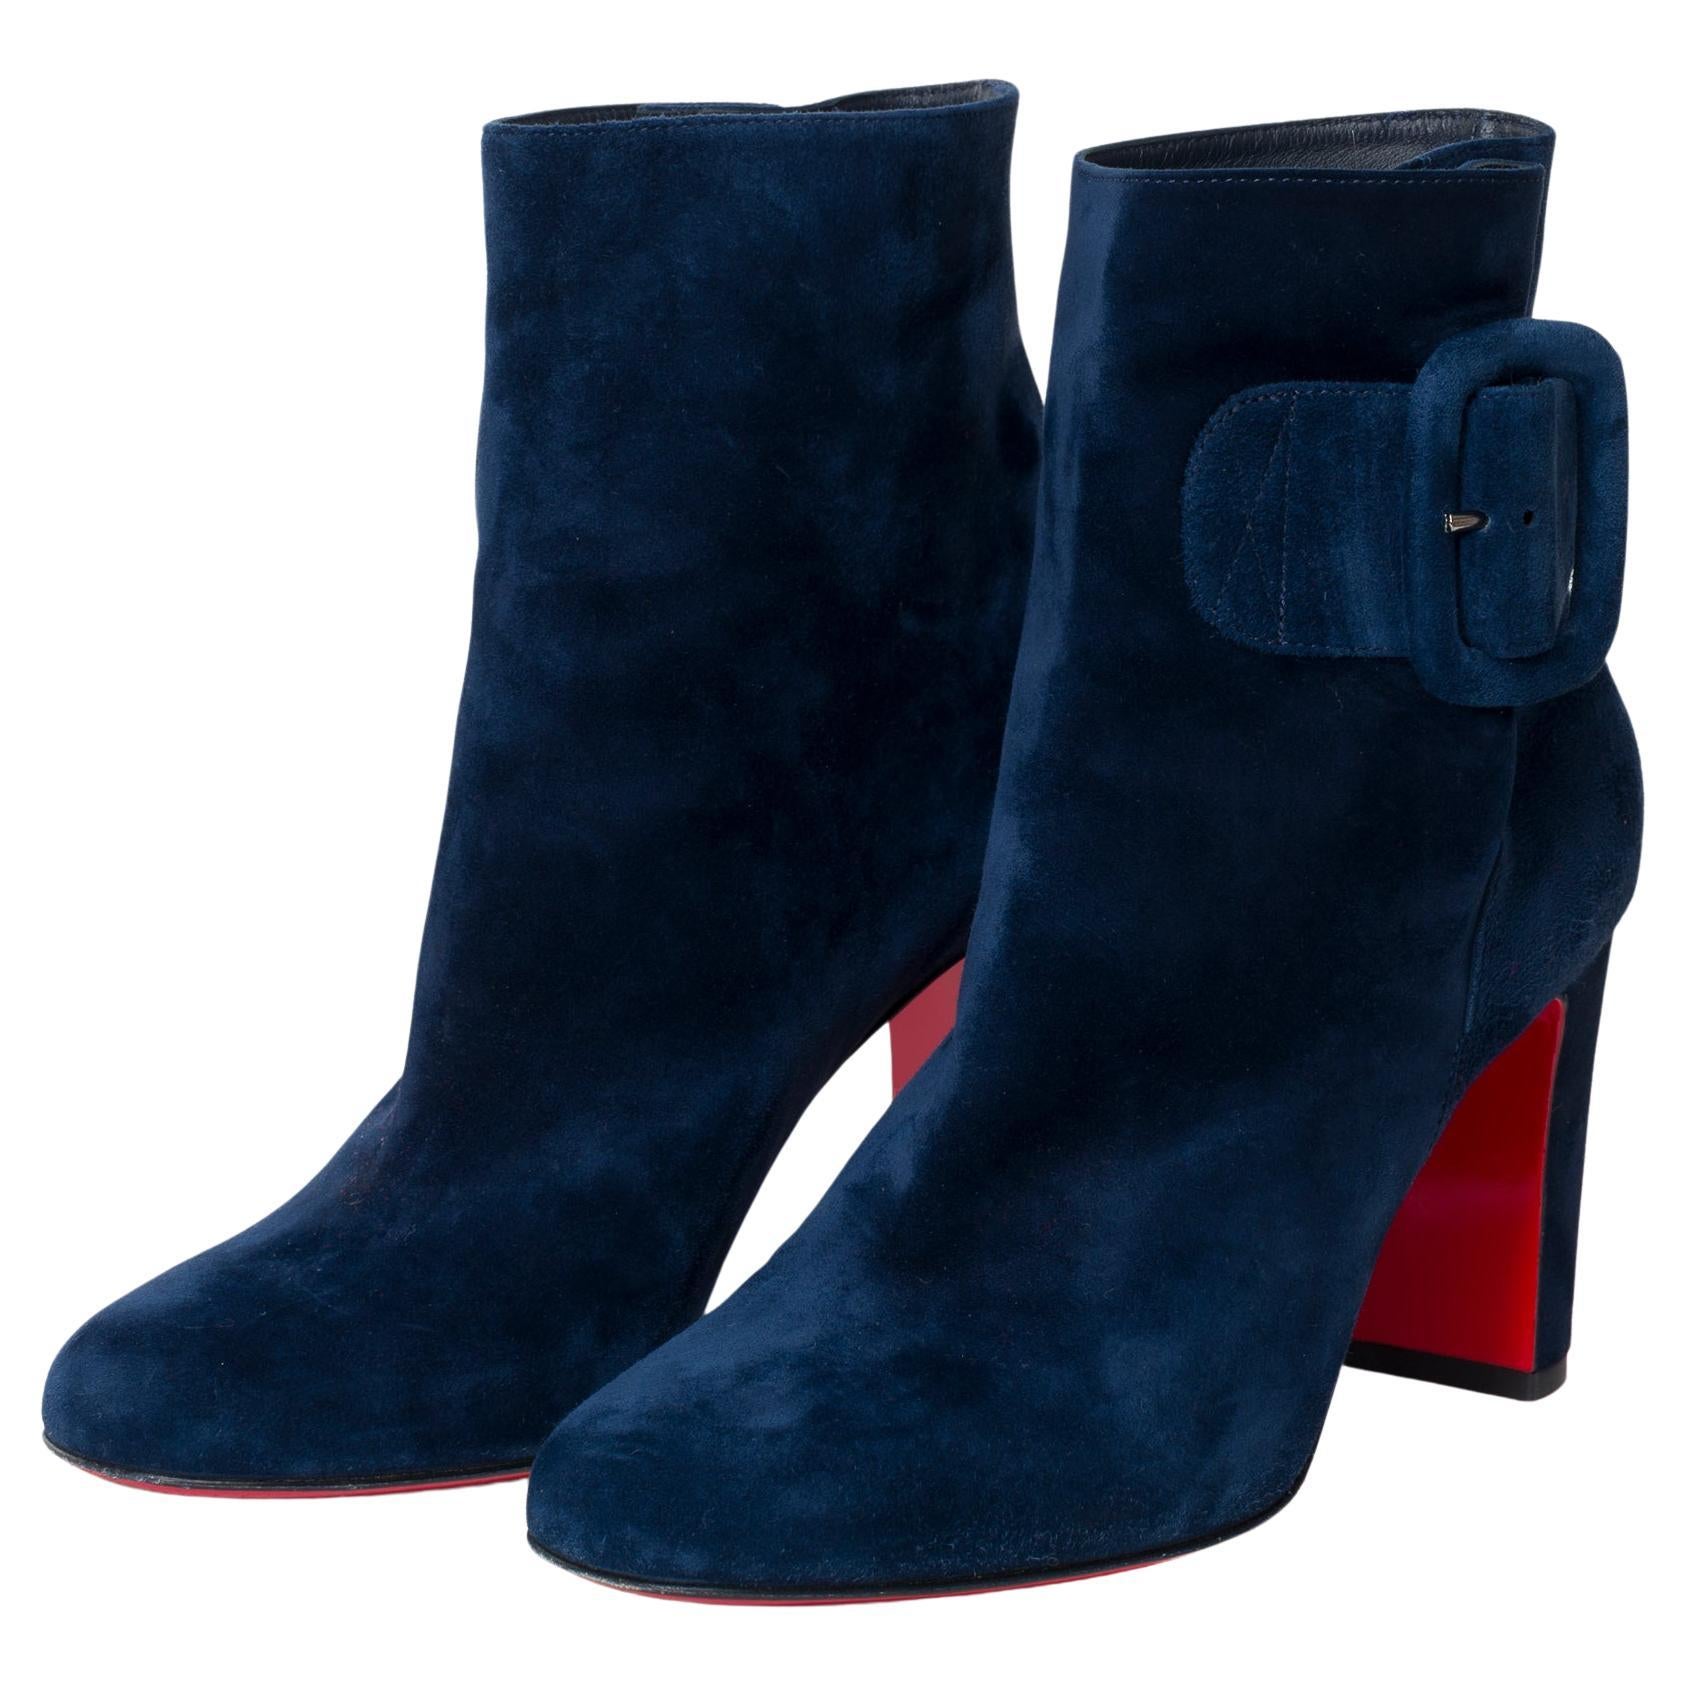 Christian Louboutin ankleboot in blue suede, size 37 For Sale